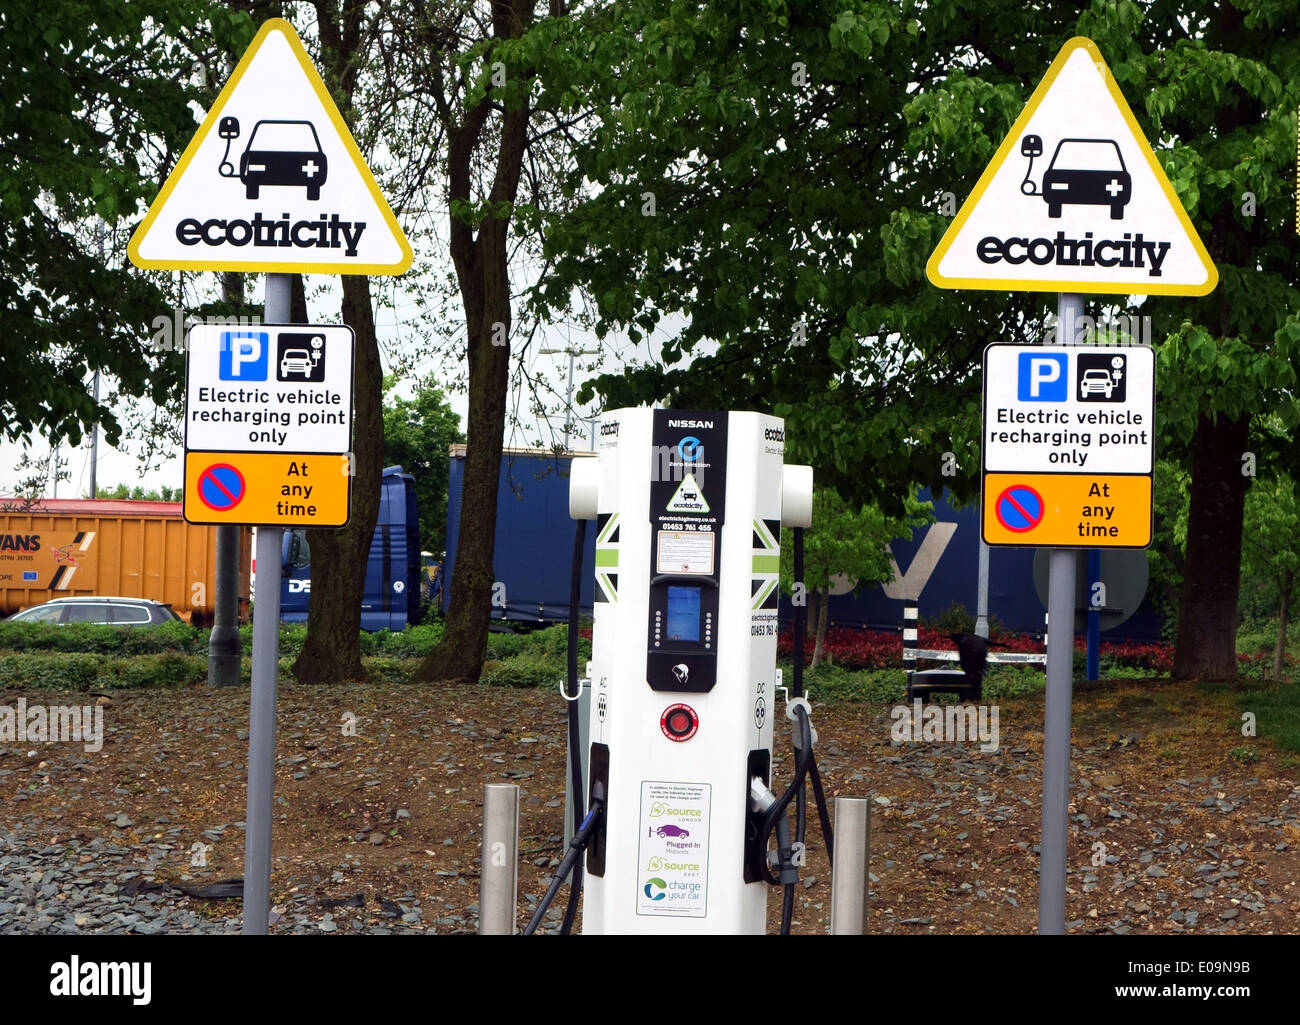 Ecotricity electric vehicle charging station in services on M4 motorway